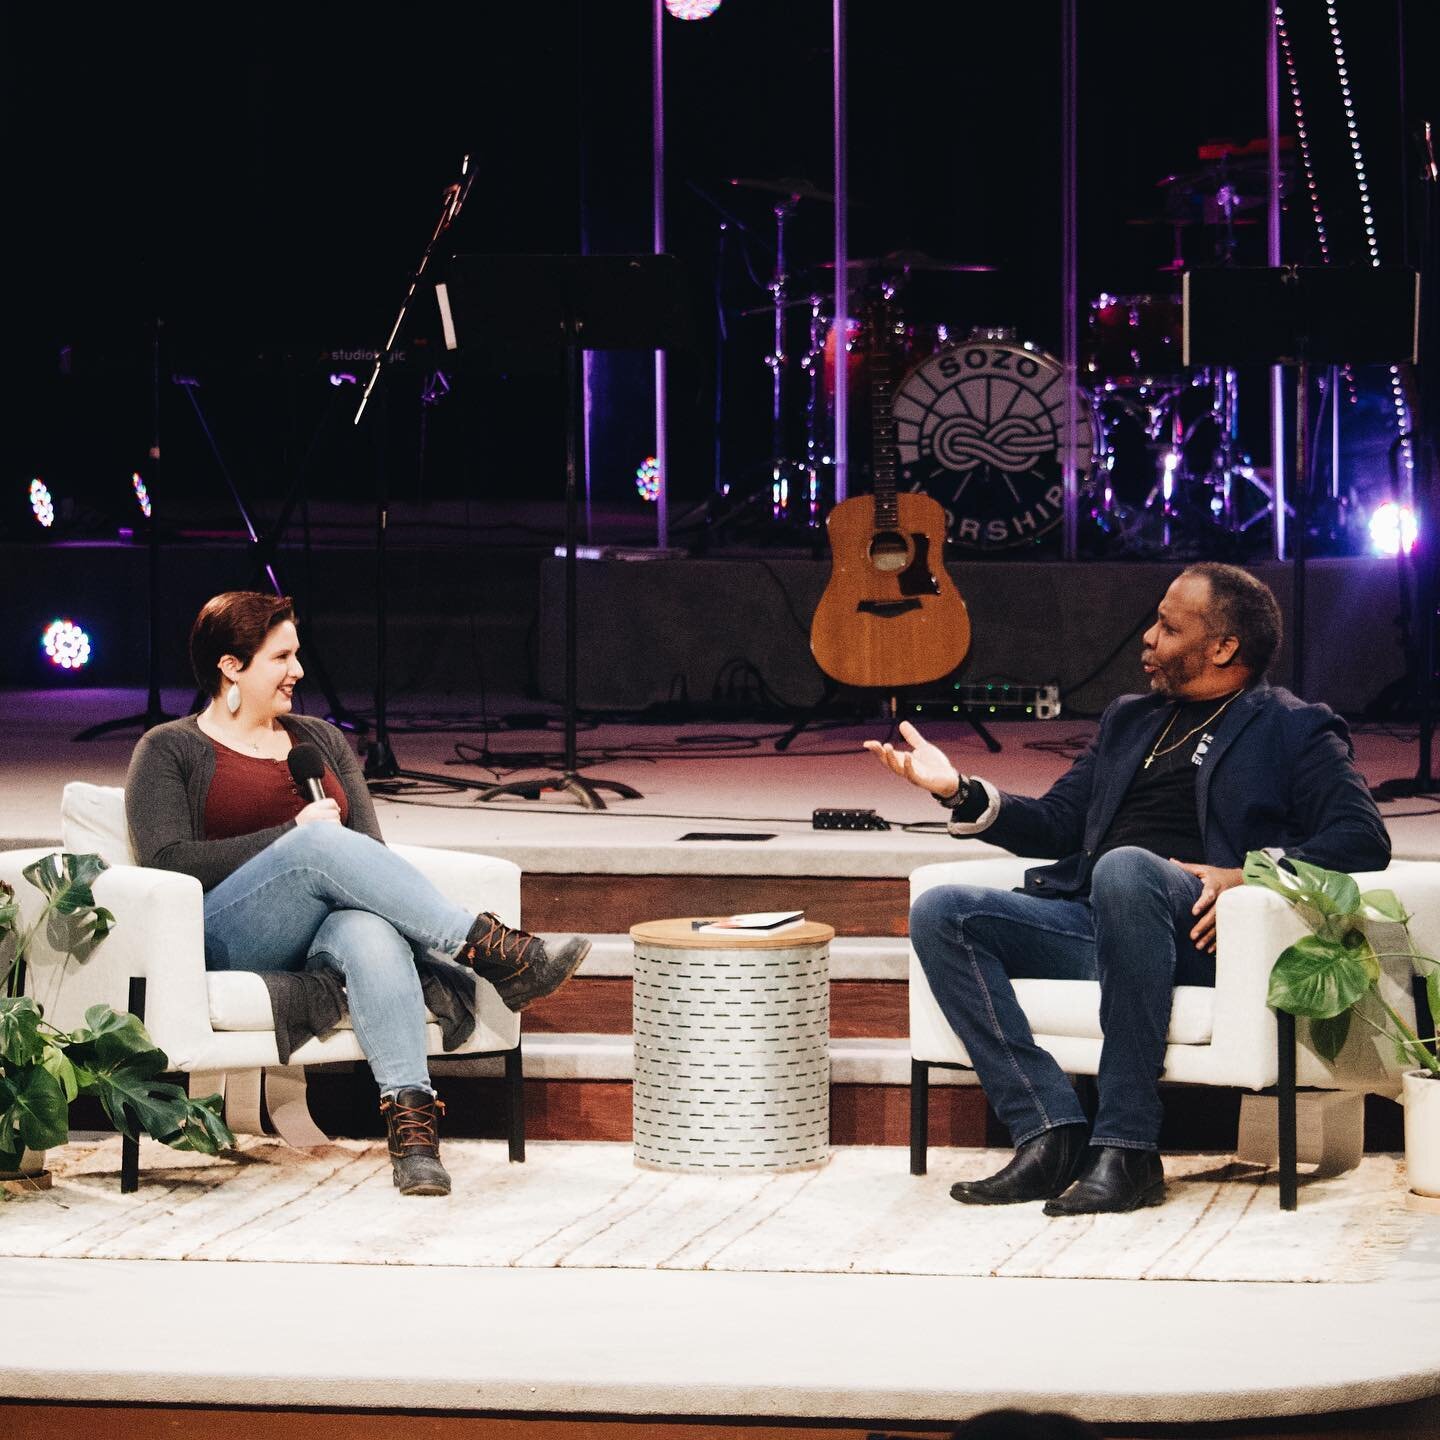 This Sunday! To close out our Summer Voices series we&rsquo;ll be doing an &ldquo;On the Couch&rdquo; session with Pastor Steve where we will hear from a few different people from the congregation on what &ldquo;Taking Ground&rdquo; means to them. We